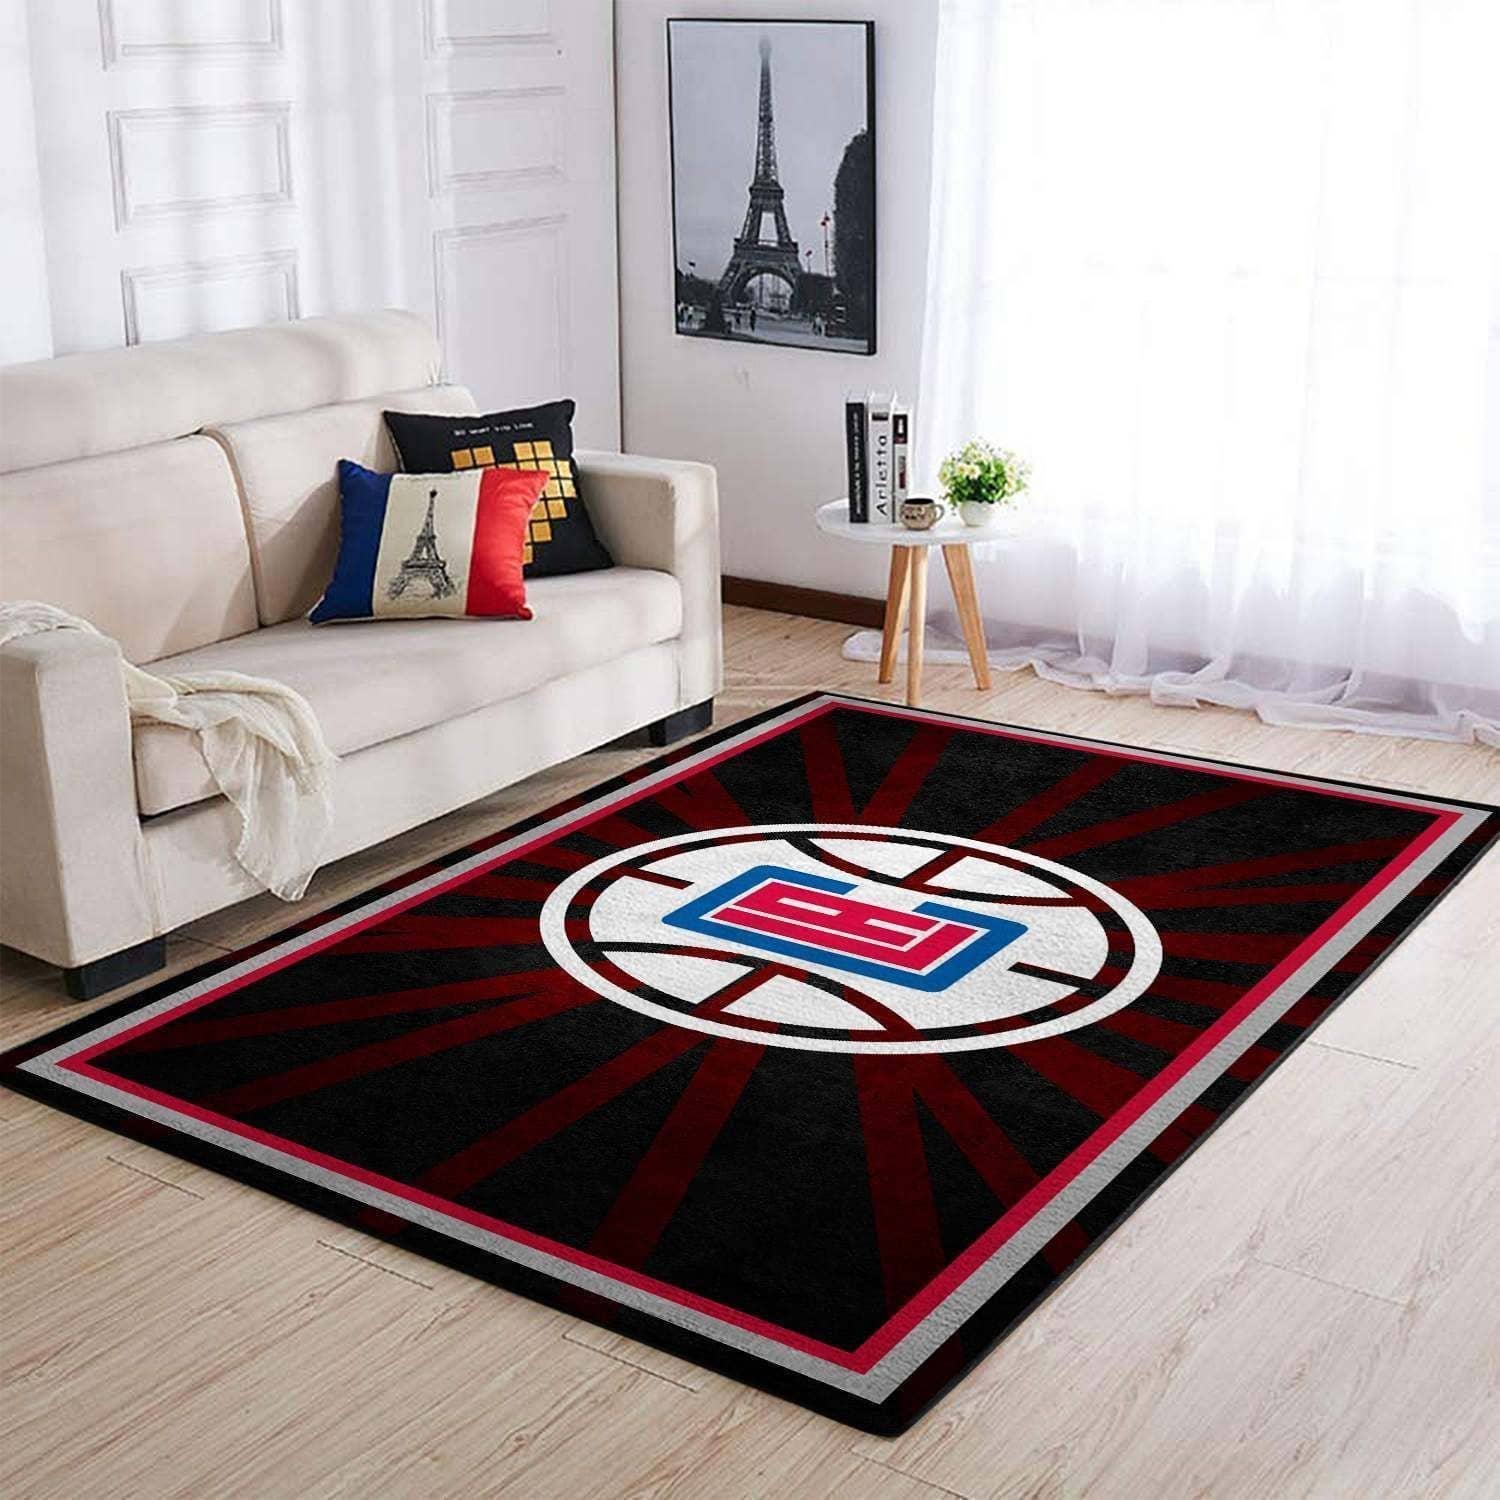 Amazon Los Angeles Clippers Living Room Area No3578 Rug